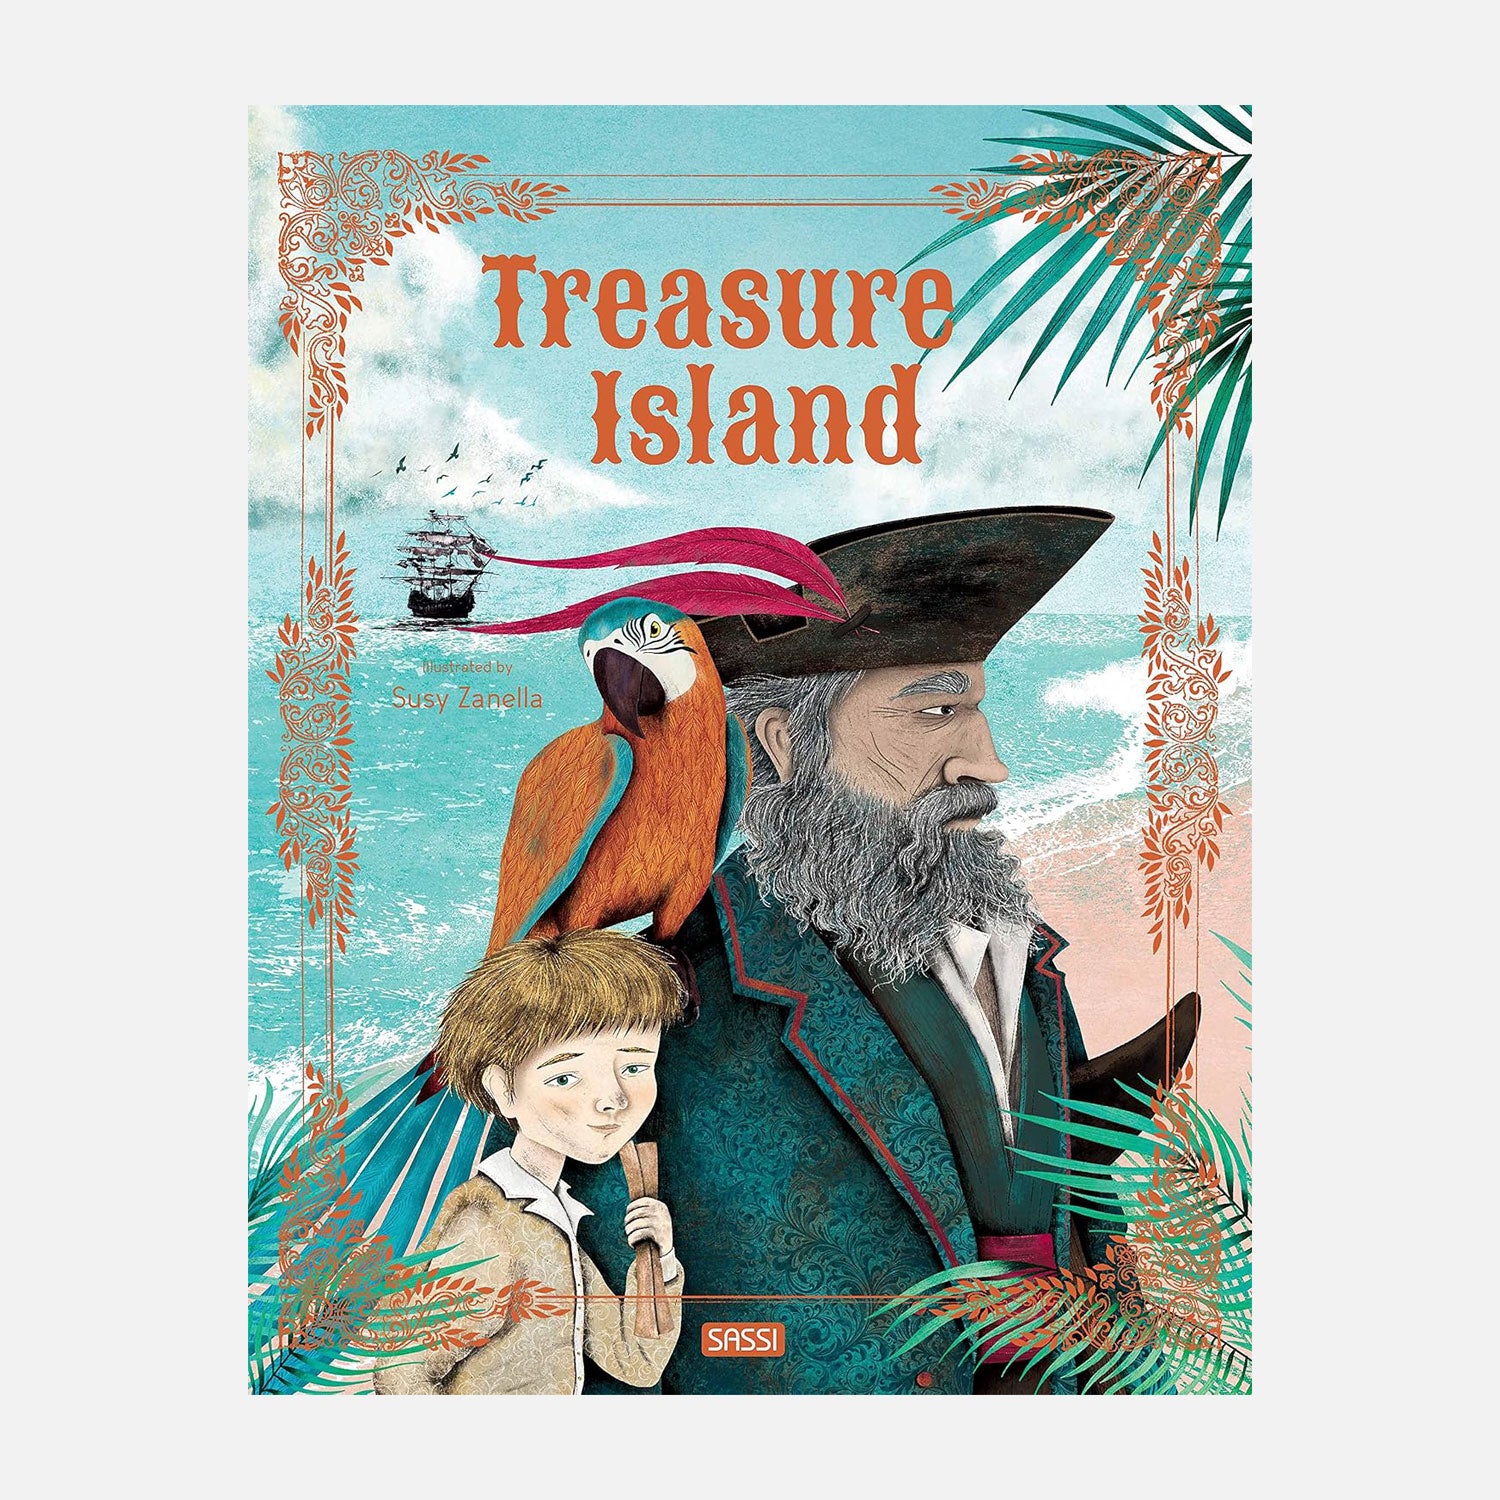 Treasure Island Picture book with pirate, parrot and boy under a palm tree